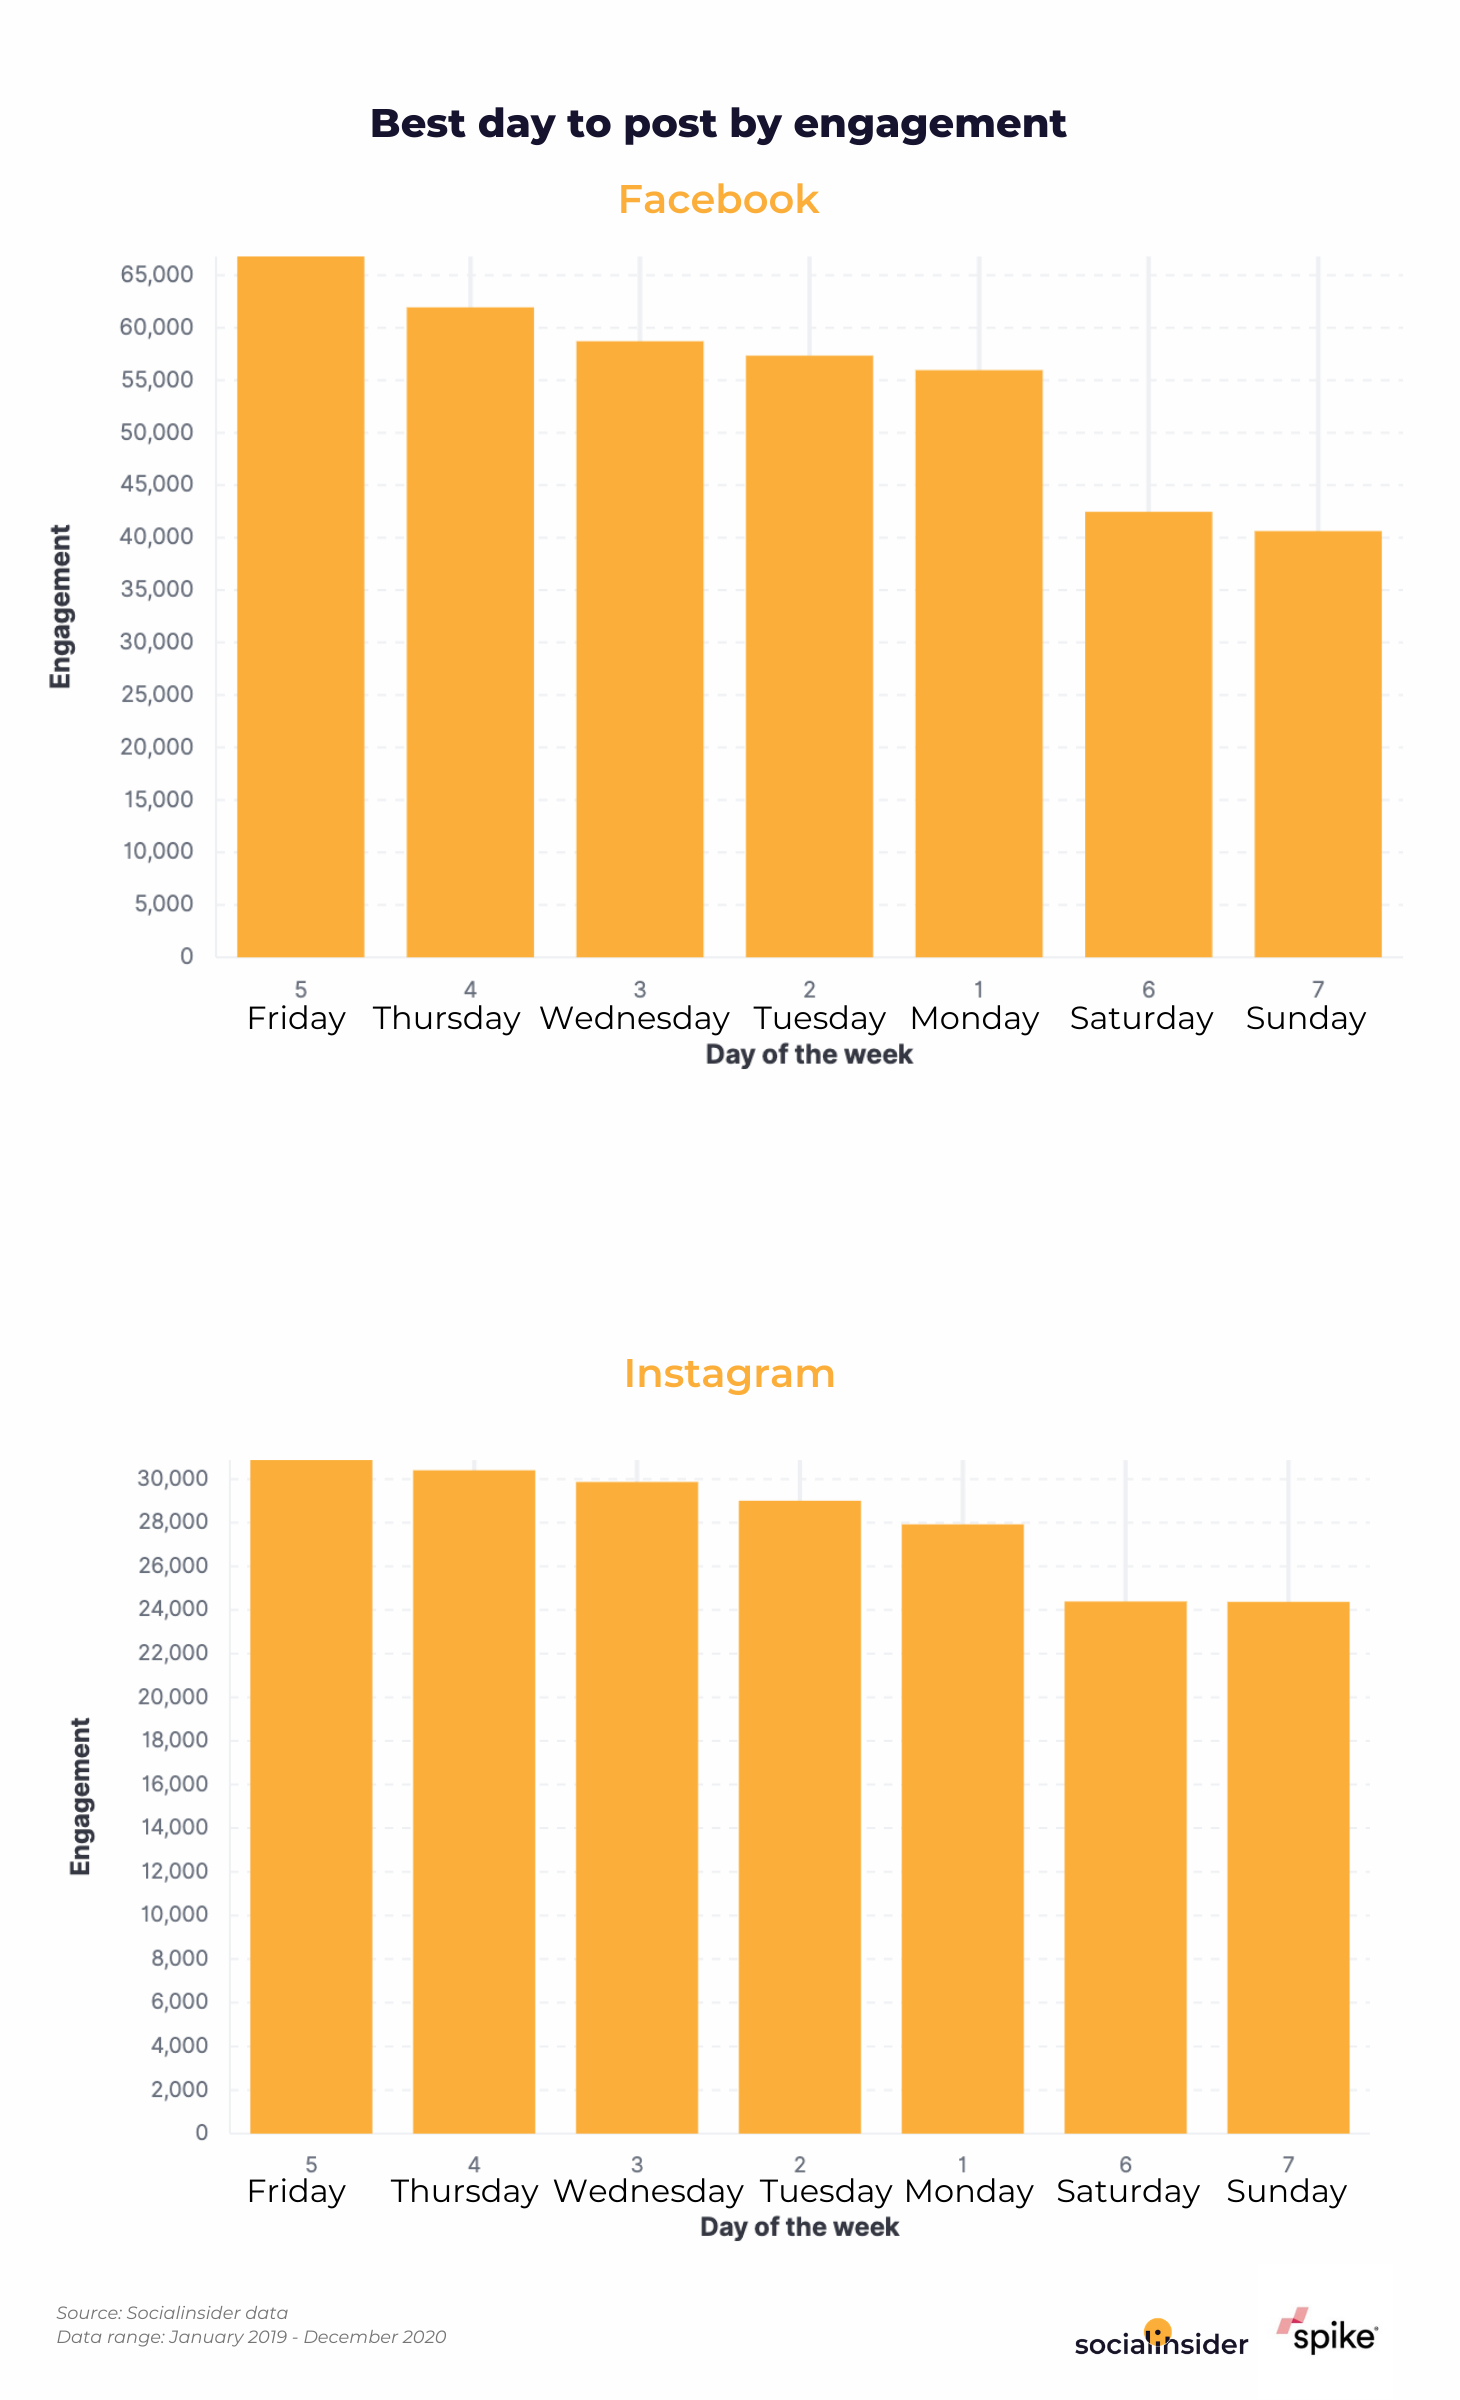 This graphic shows which is the most engaging day on Facebook and Instagram for brands from the Uk.